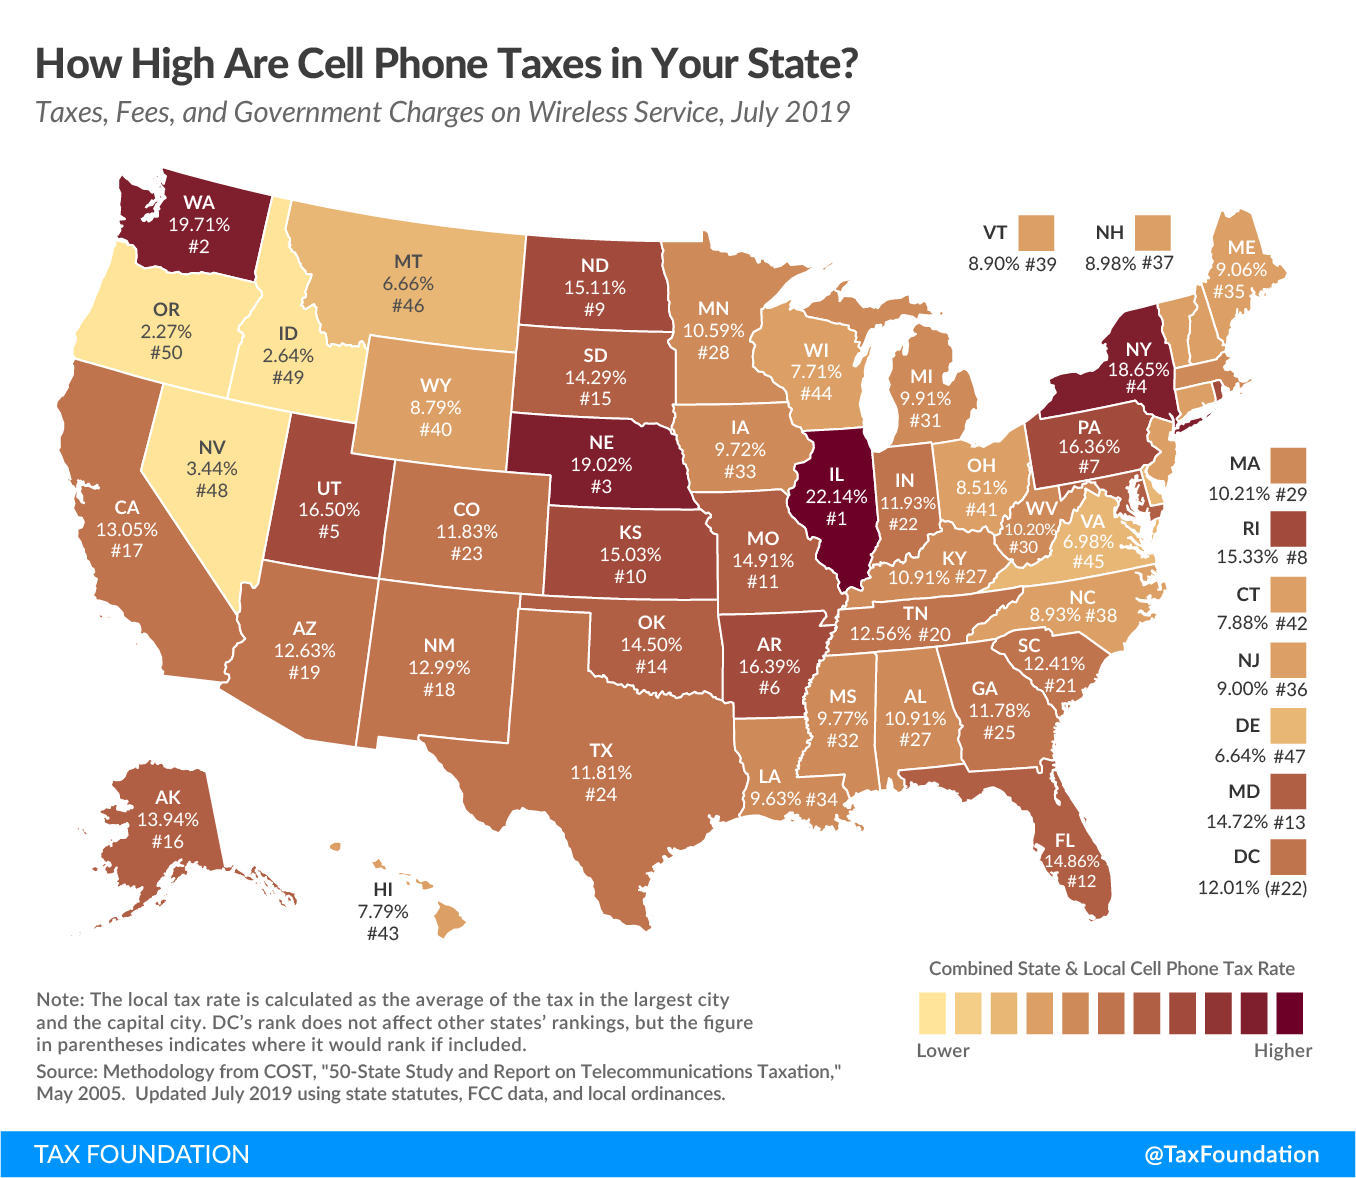 cell phone tax, wireless taxes, 911 tax cell phone taxes, wireless taxes and fees, wireless fees, FCC, smartphone taxes, highest wireless taxes, fees, and surcharges